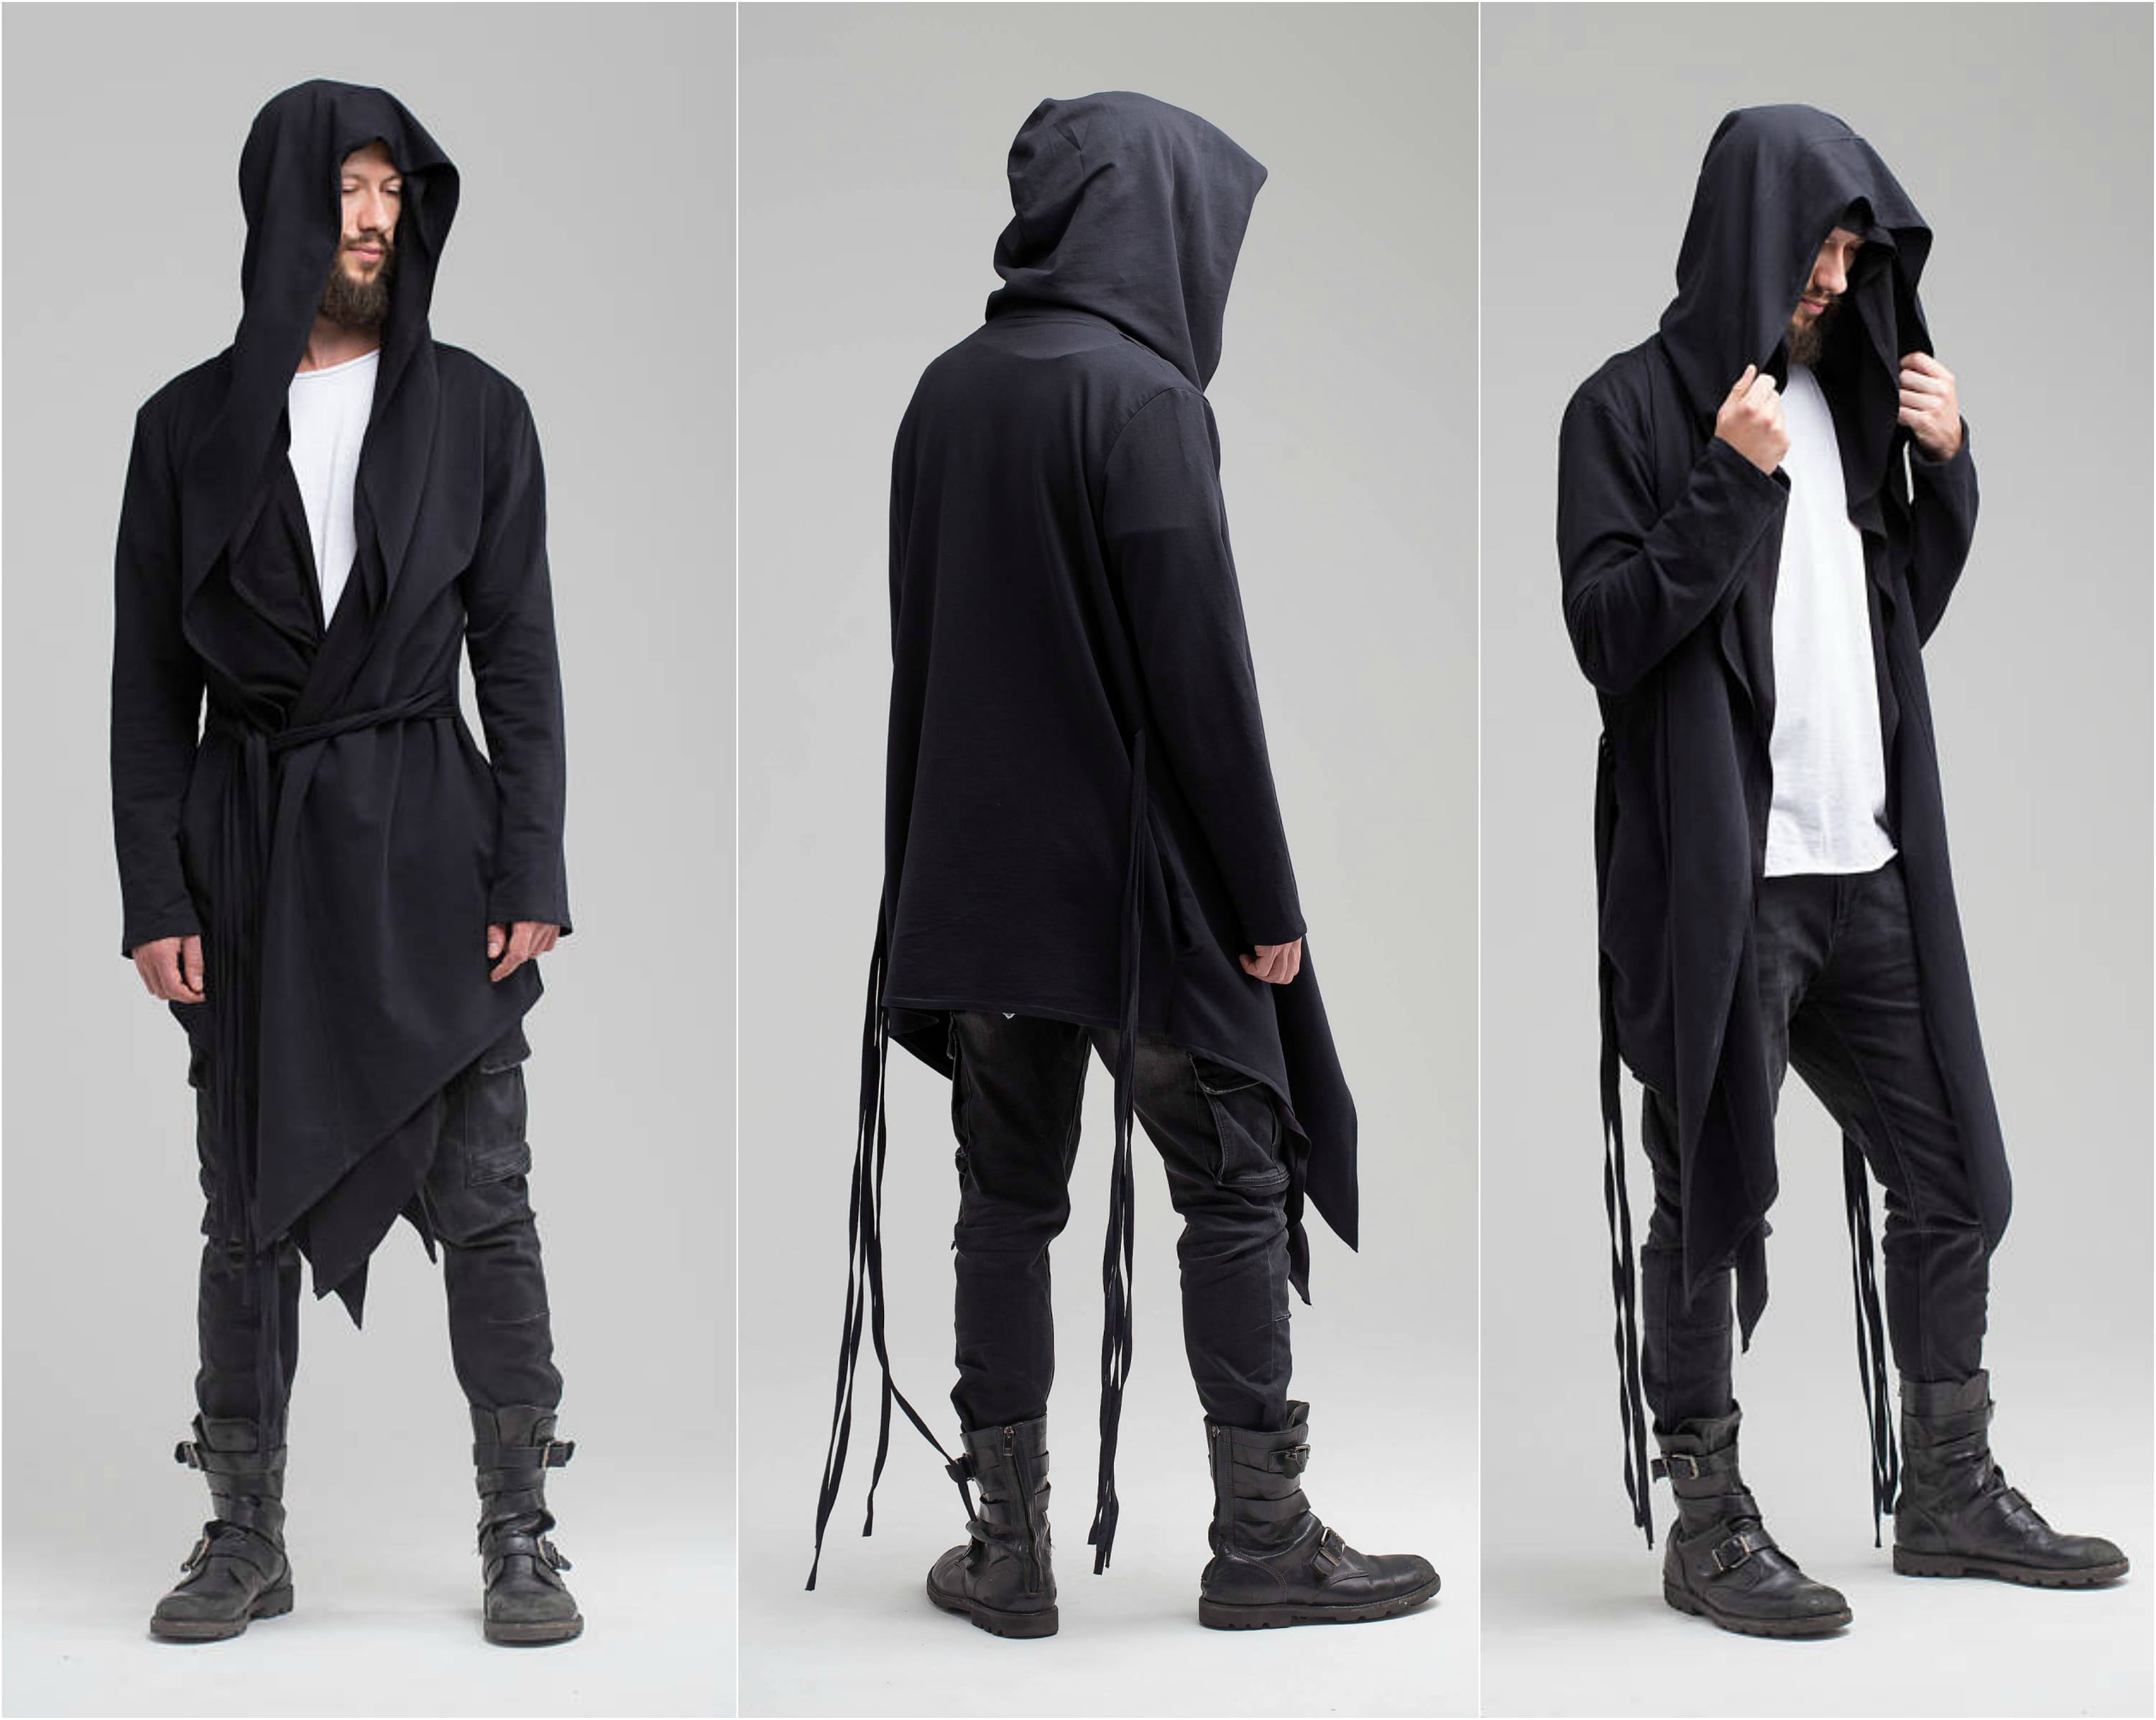 assassin creed clothing